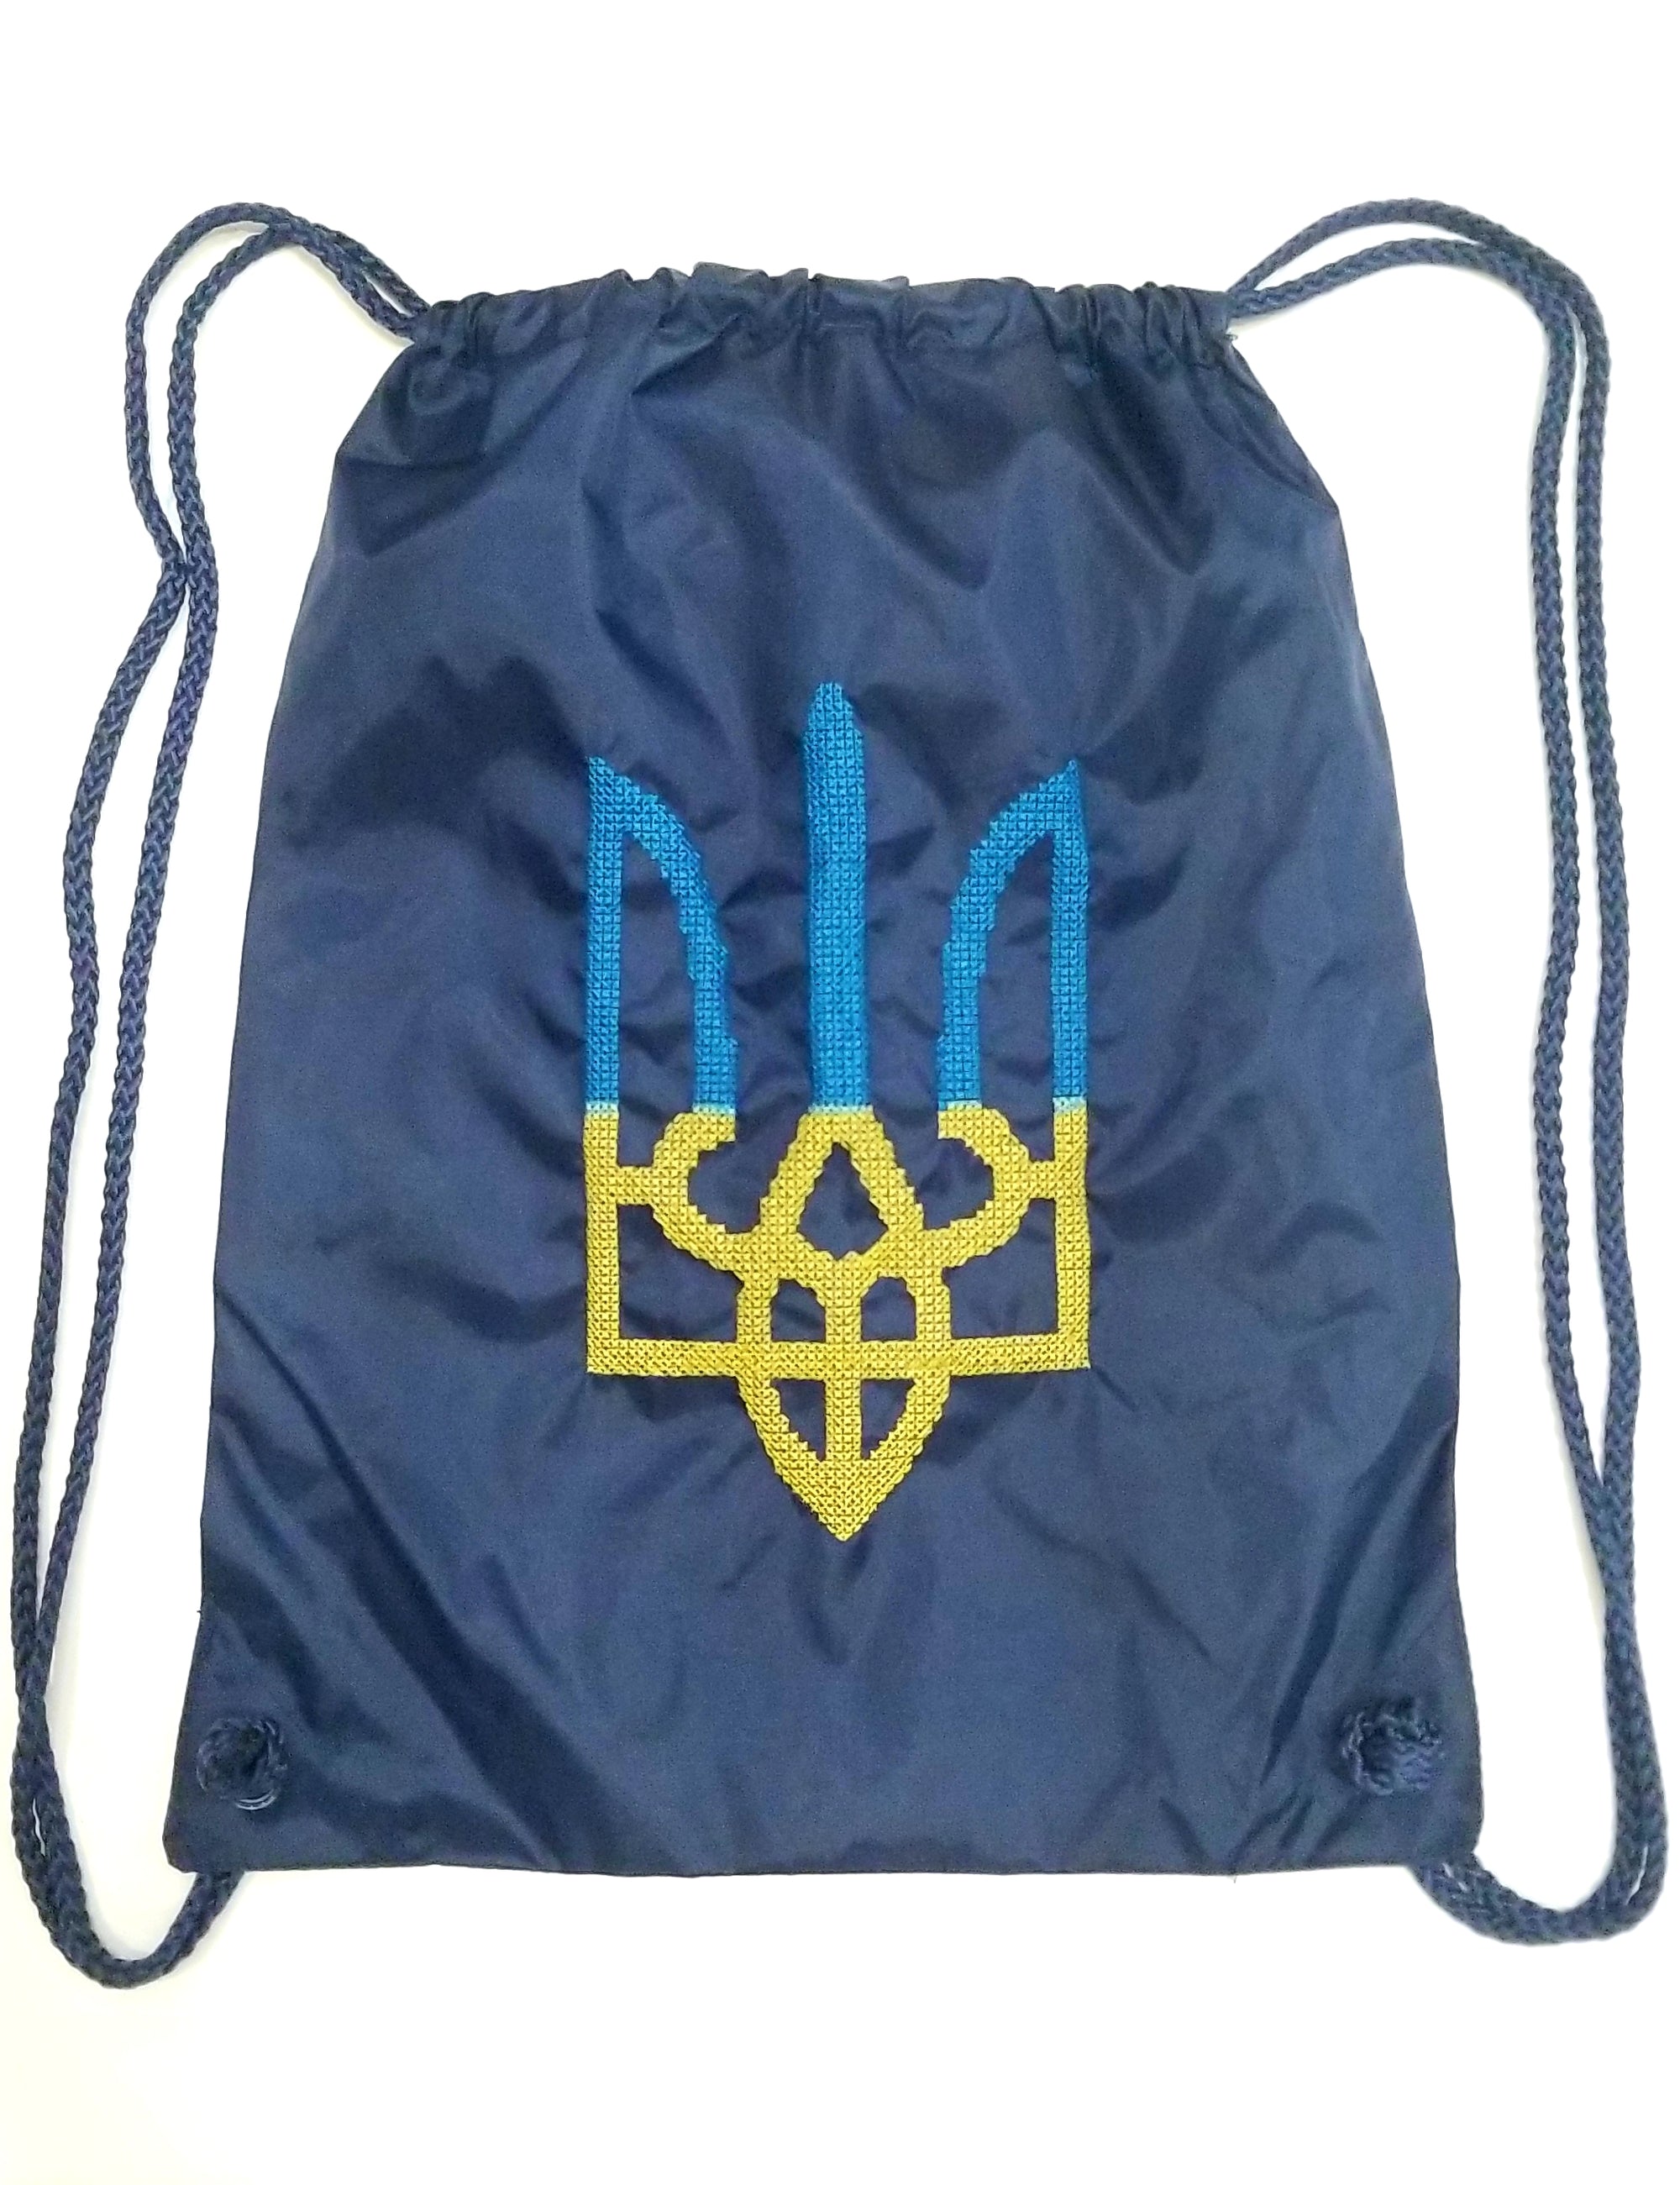 Embroidered drawstring backpack "Tryzub"